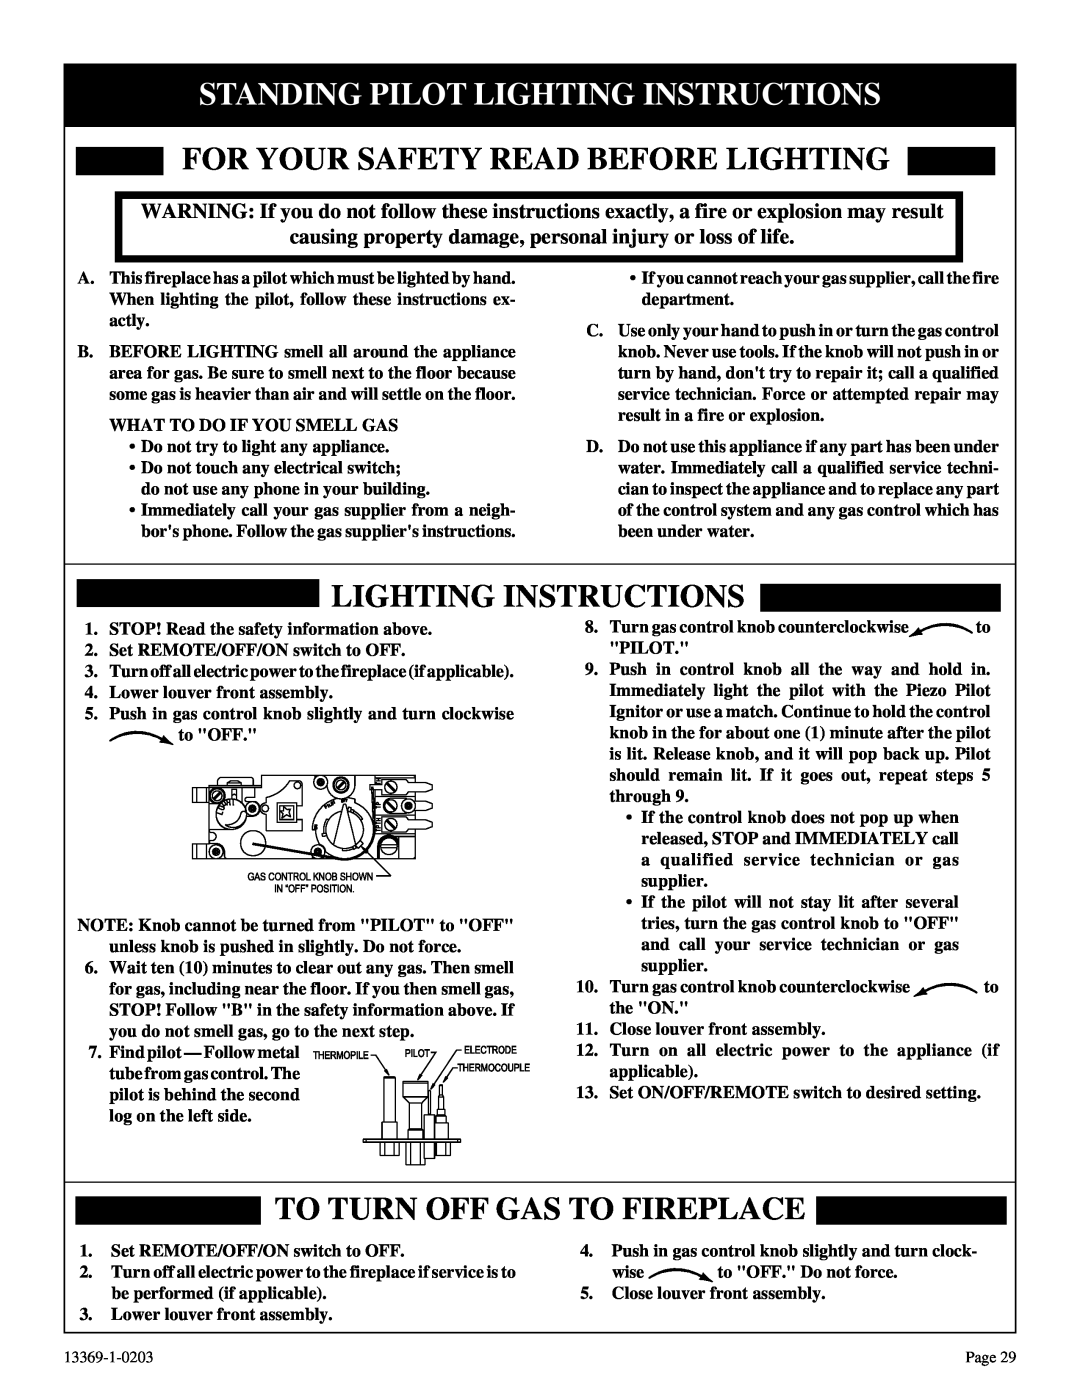 DVS 30-2 Standing Pilot Lighting Instructions, For Your Safety Read Before Lighting, To Turn Off Gas To Fireplace 